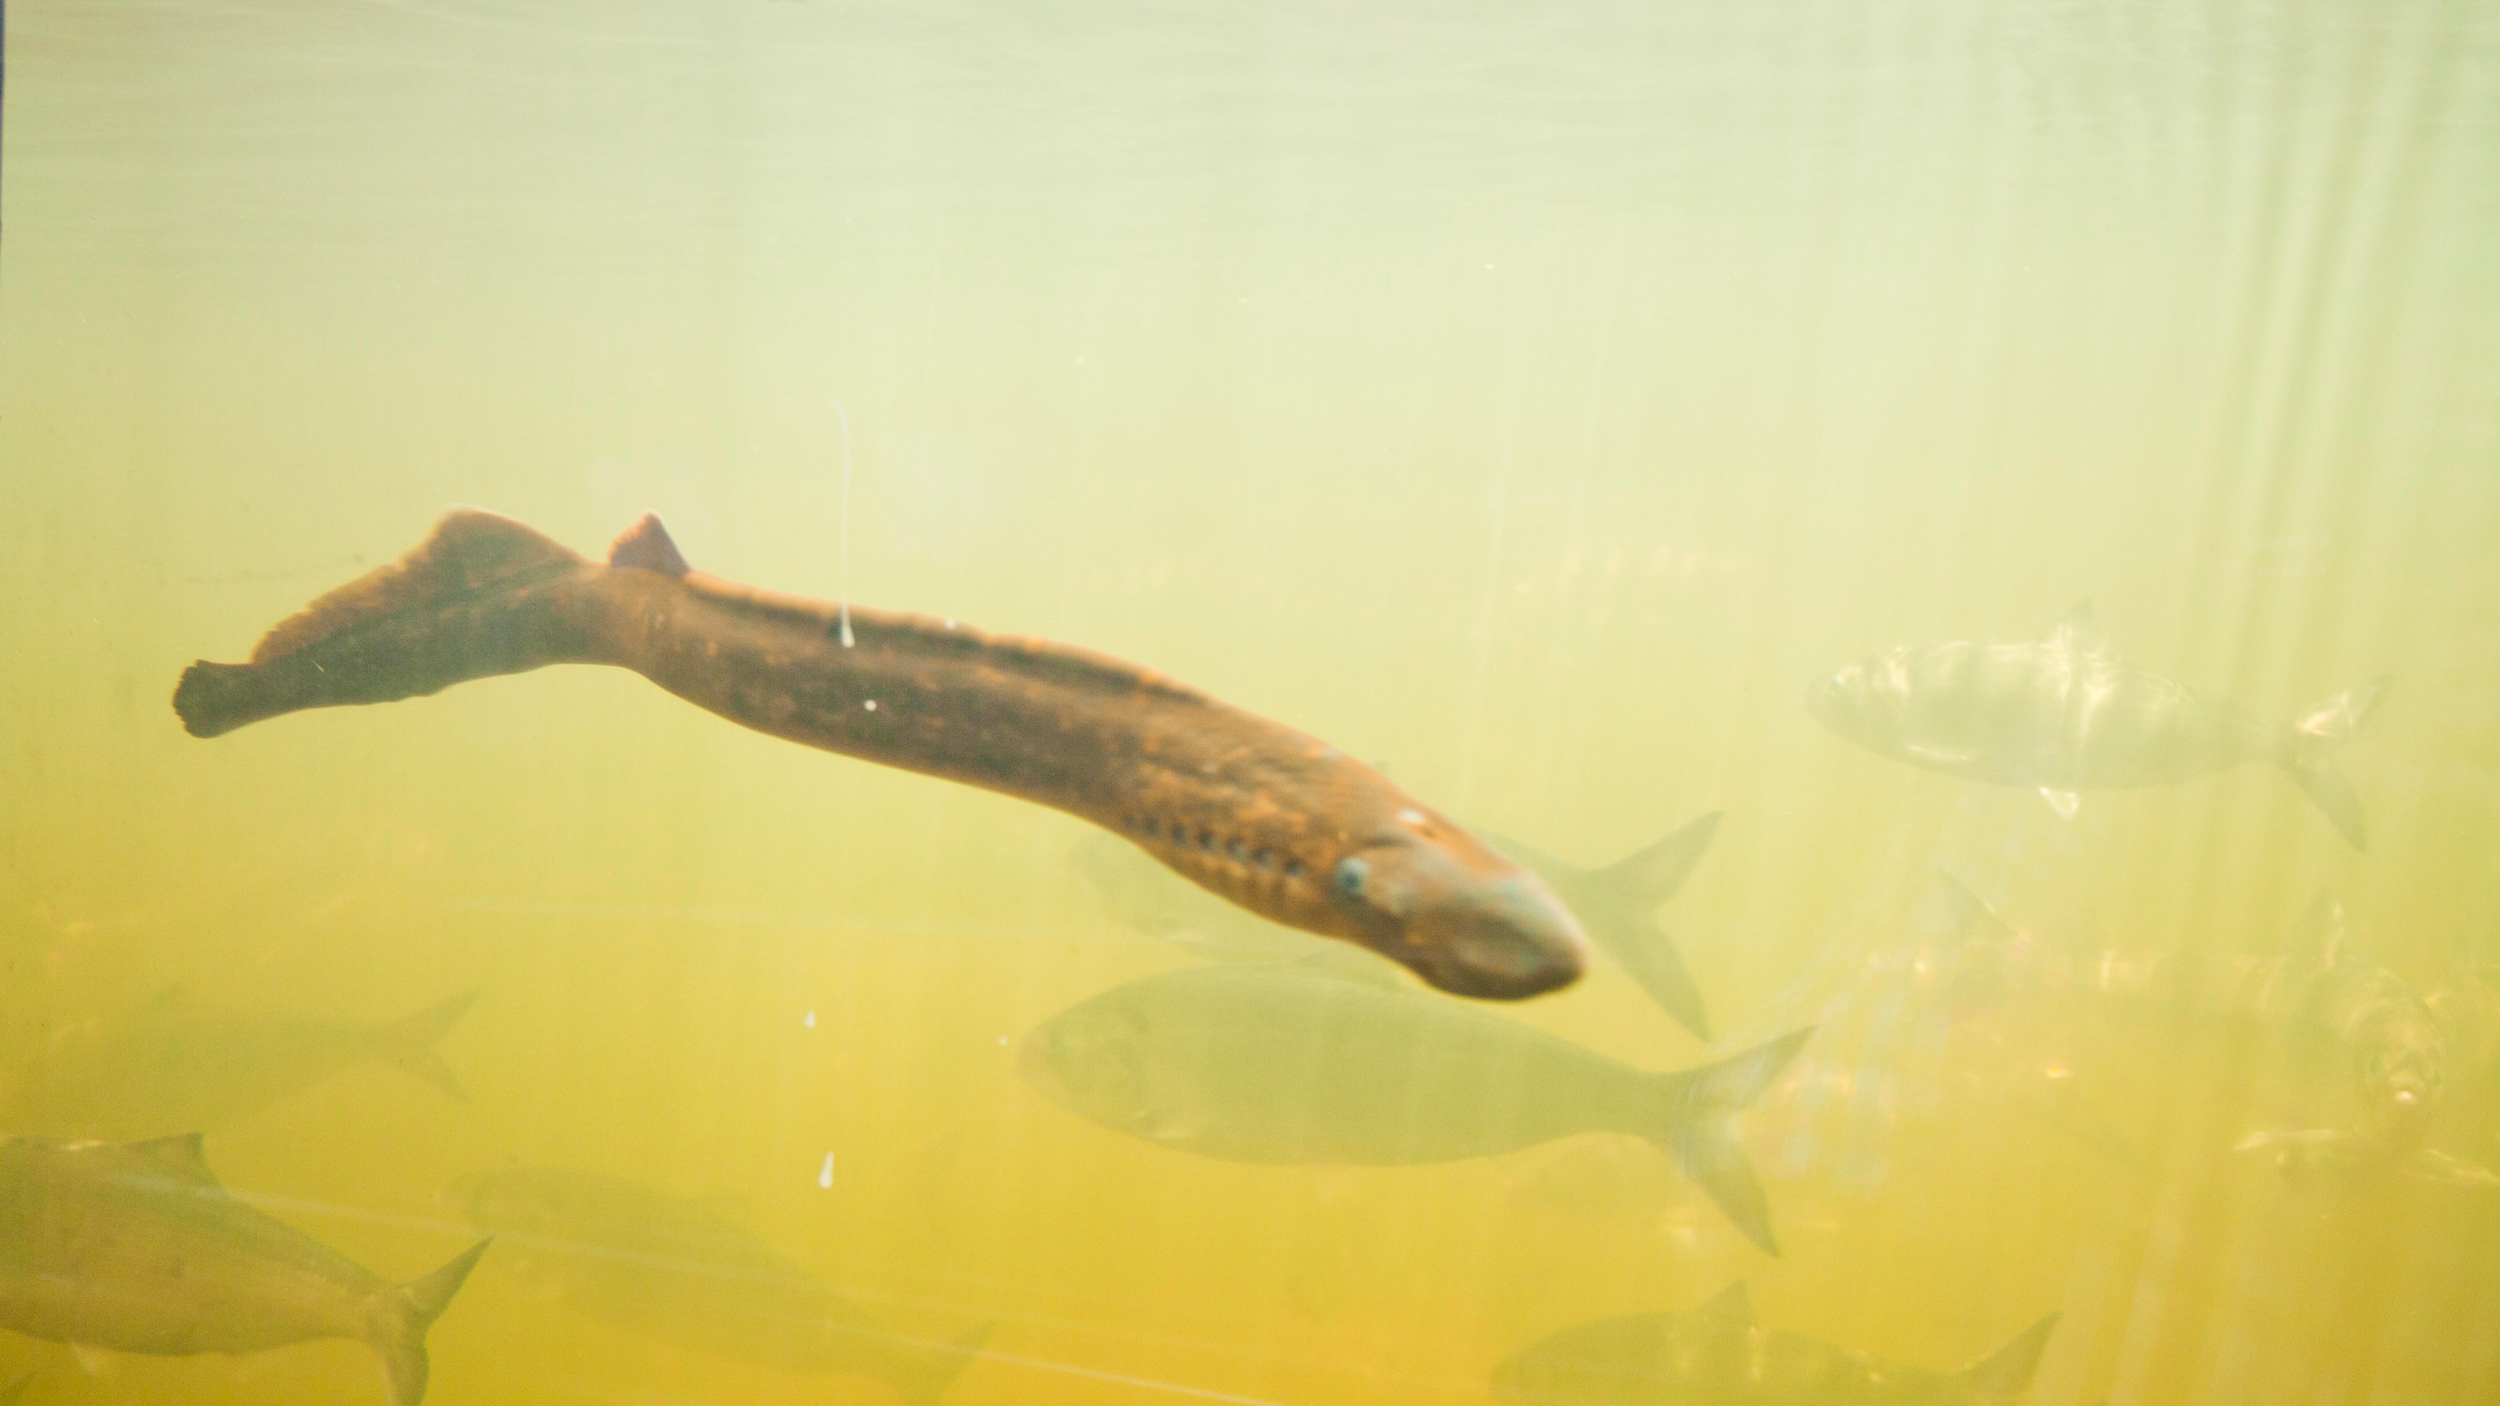 American shad and a sea lamprey pass by the viewing window at the Robert Barrett Fishway, Holyoke, Massachusetts. Photo courtesy of Holyoke Gas & Electric